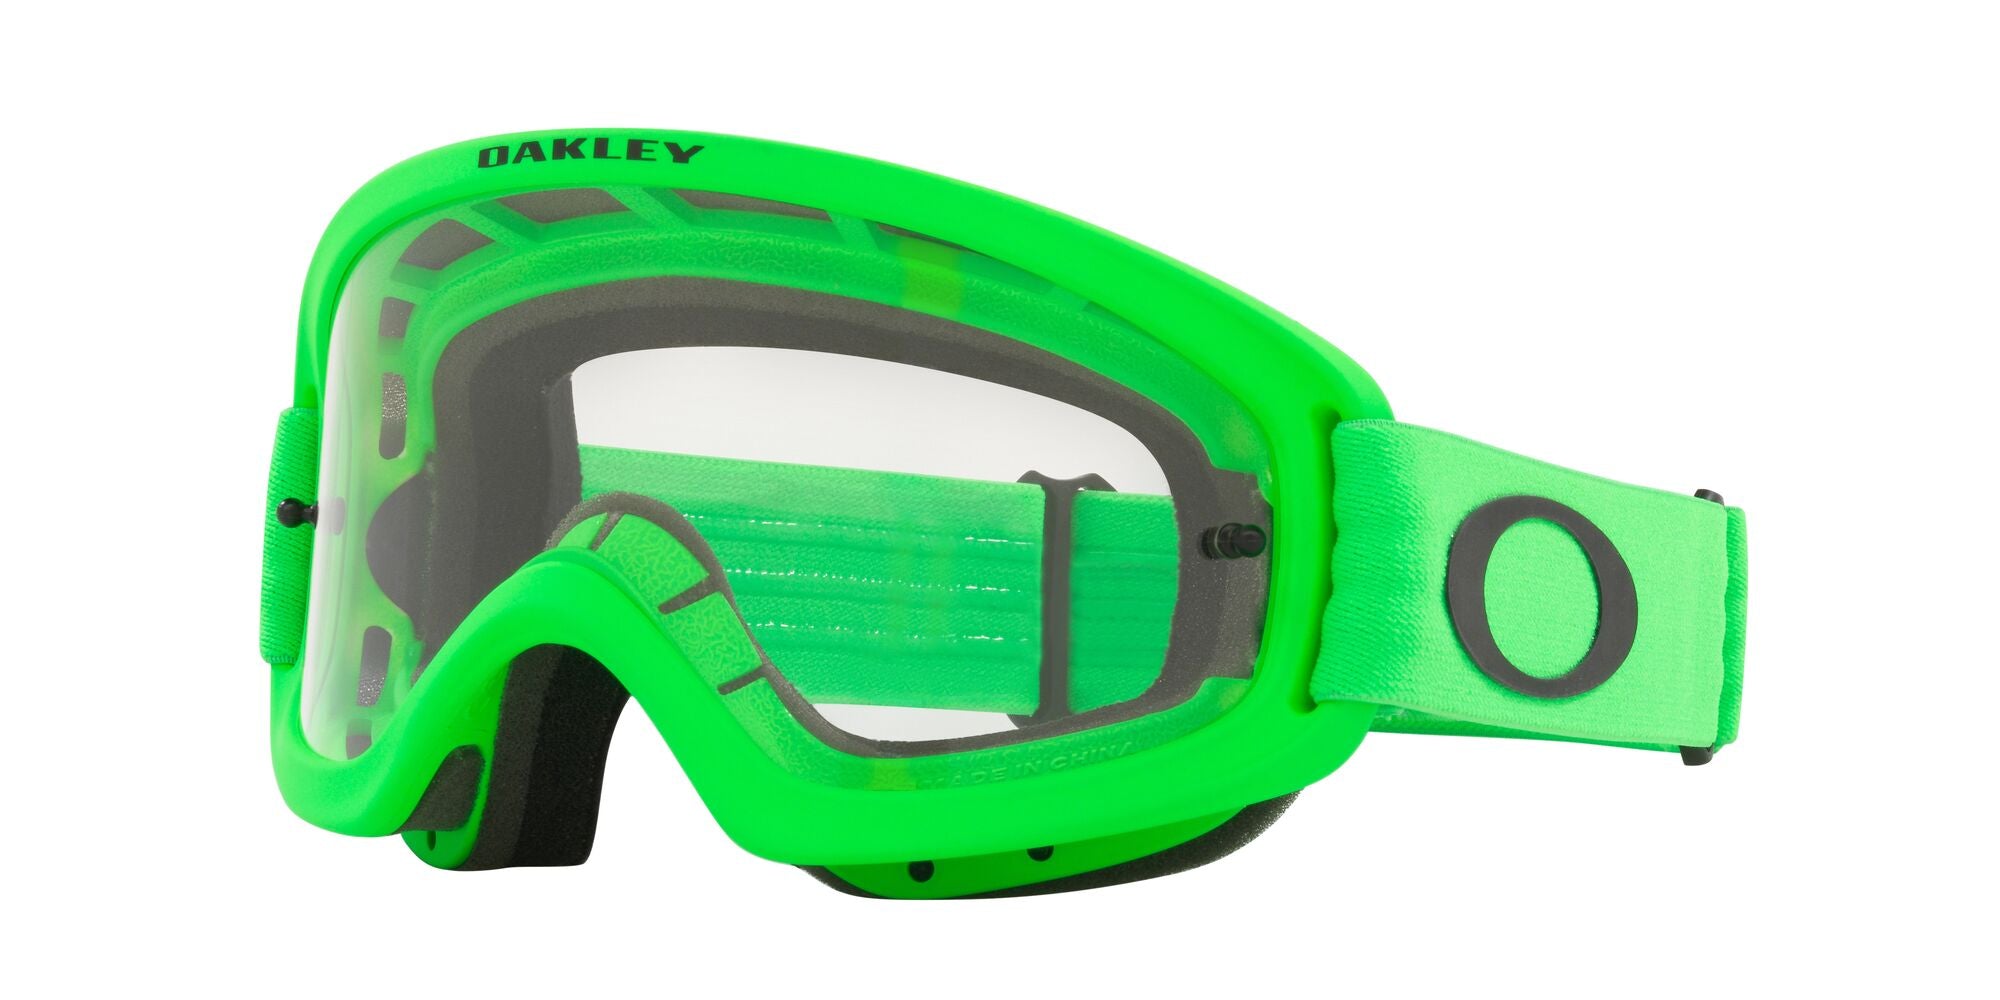 Oakley O Frame 2.0 Pro XS MX Goggle in Moto Green with Clear Lens